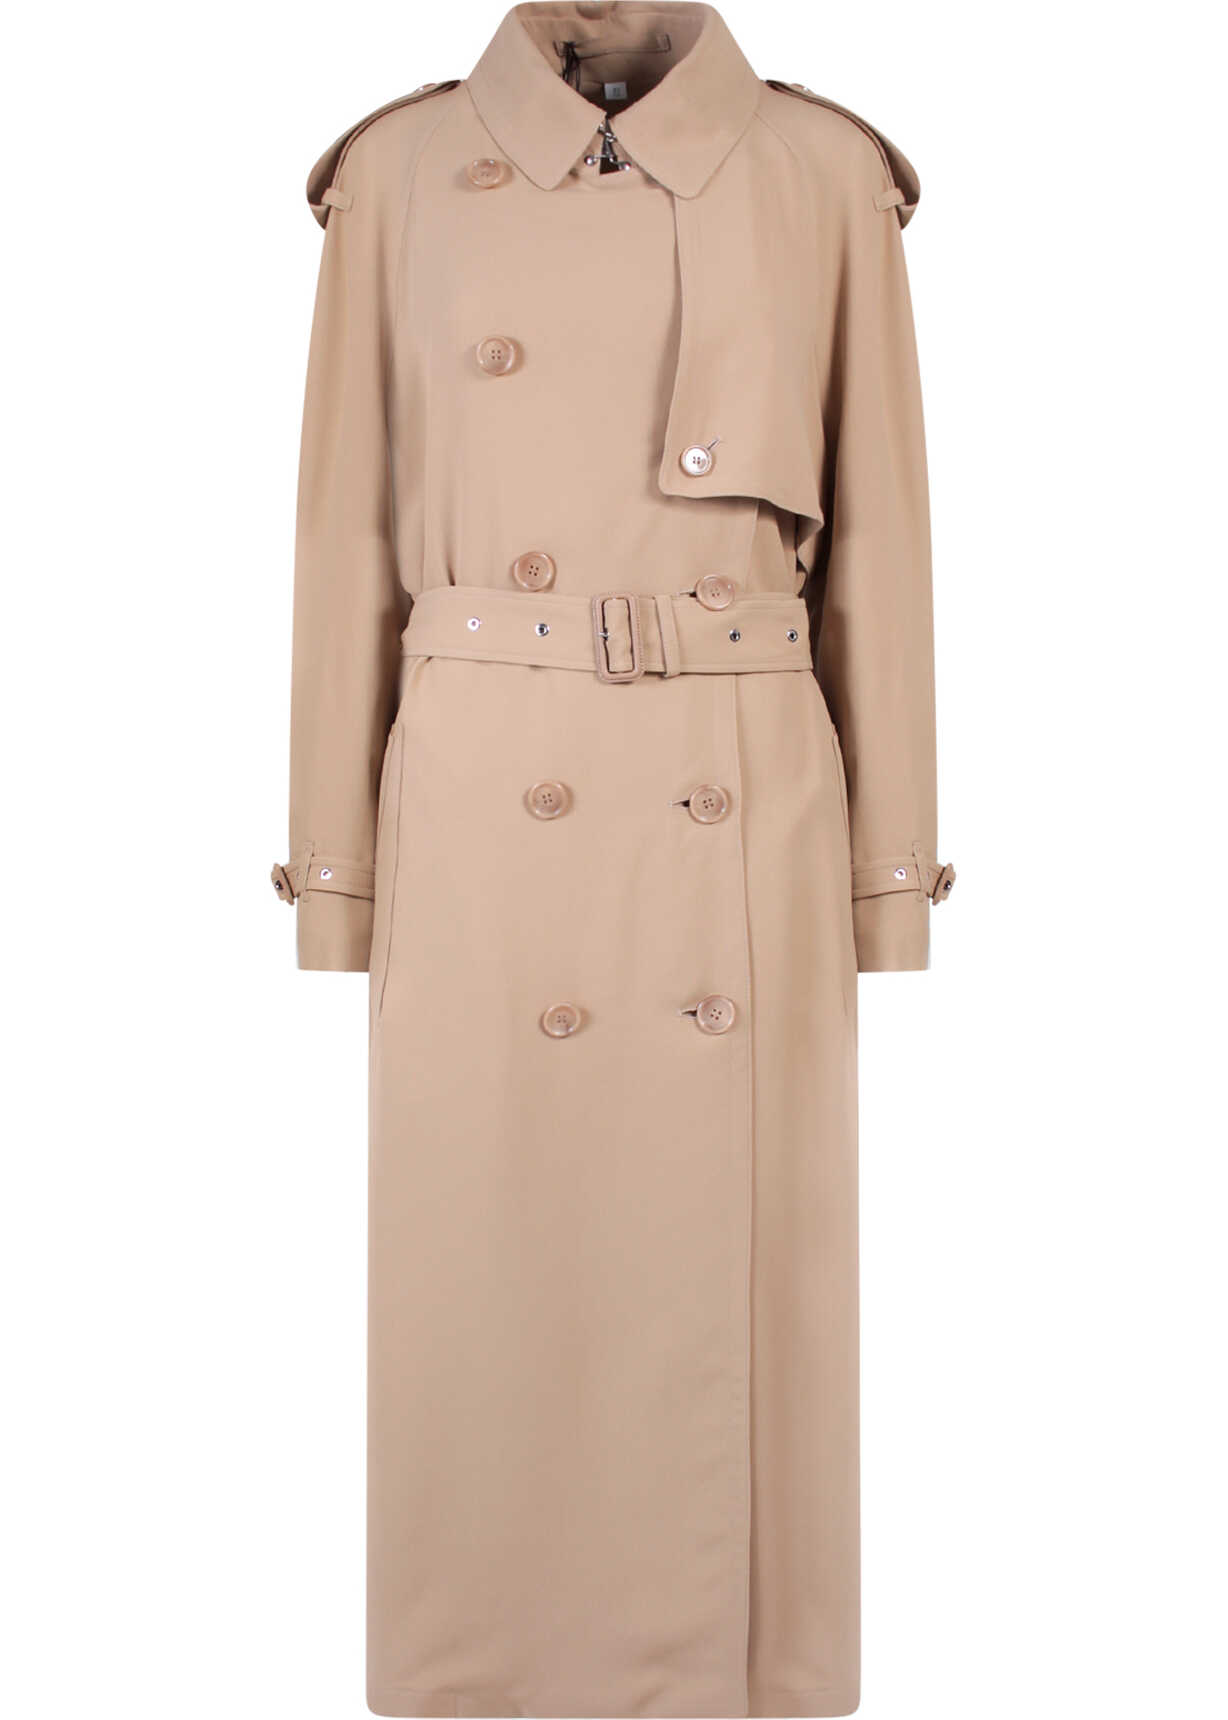 Burberry Trench Beige image9